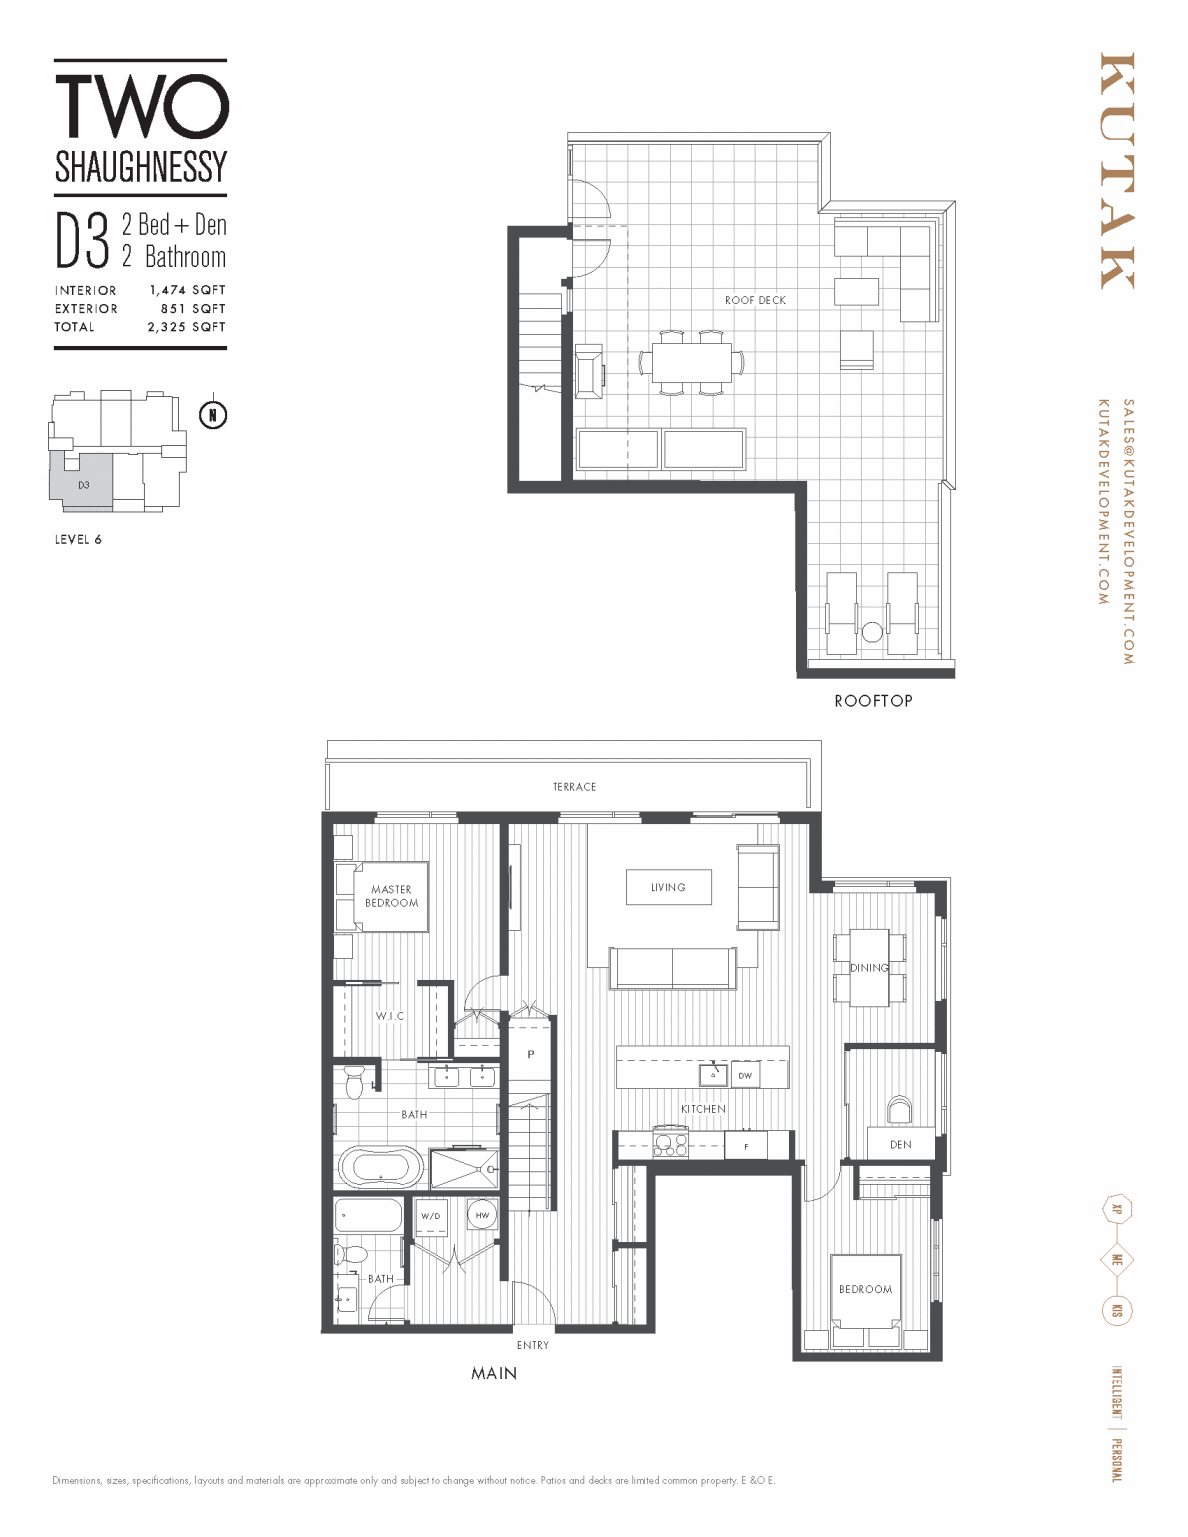 Two Shaughnessy Floor Plan D3